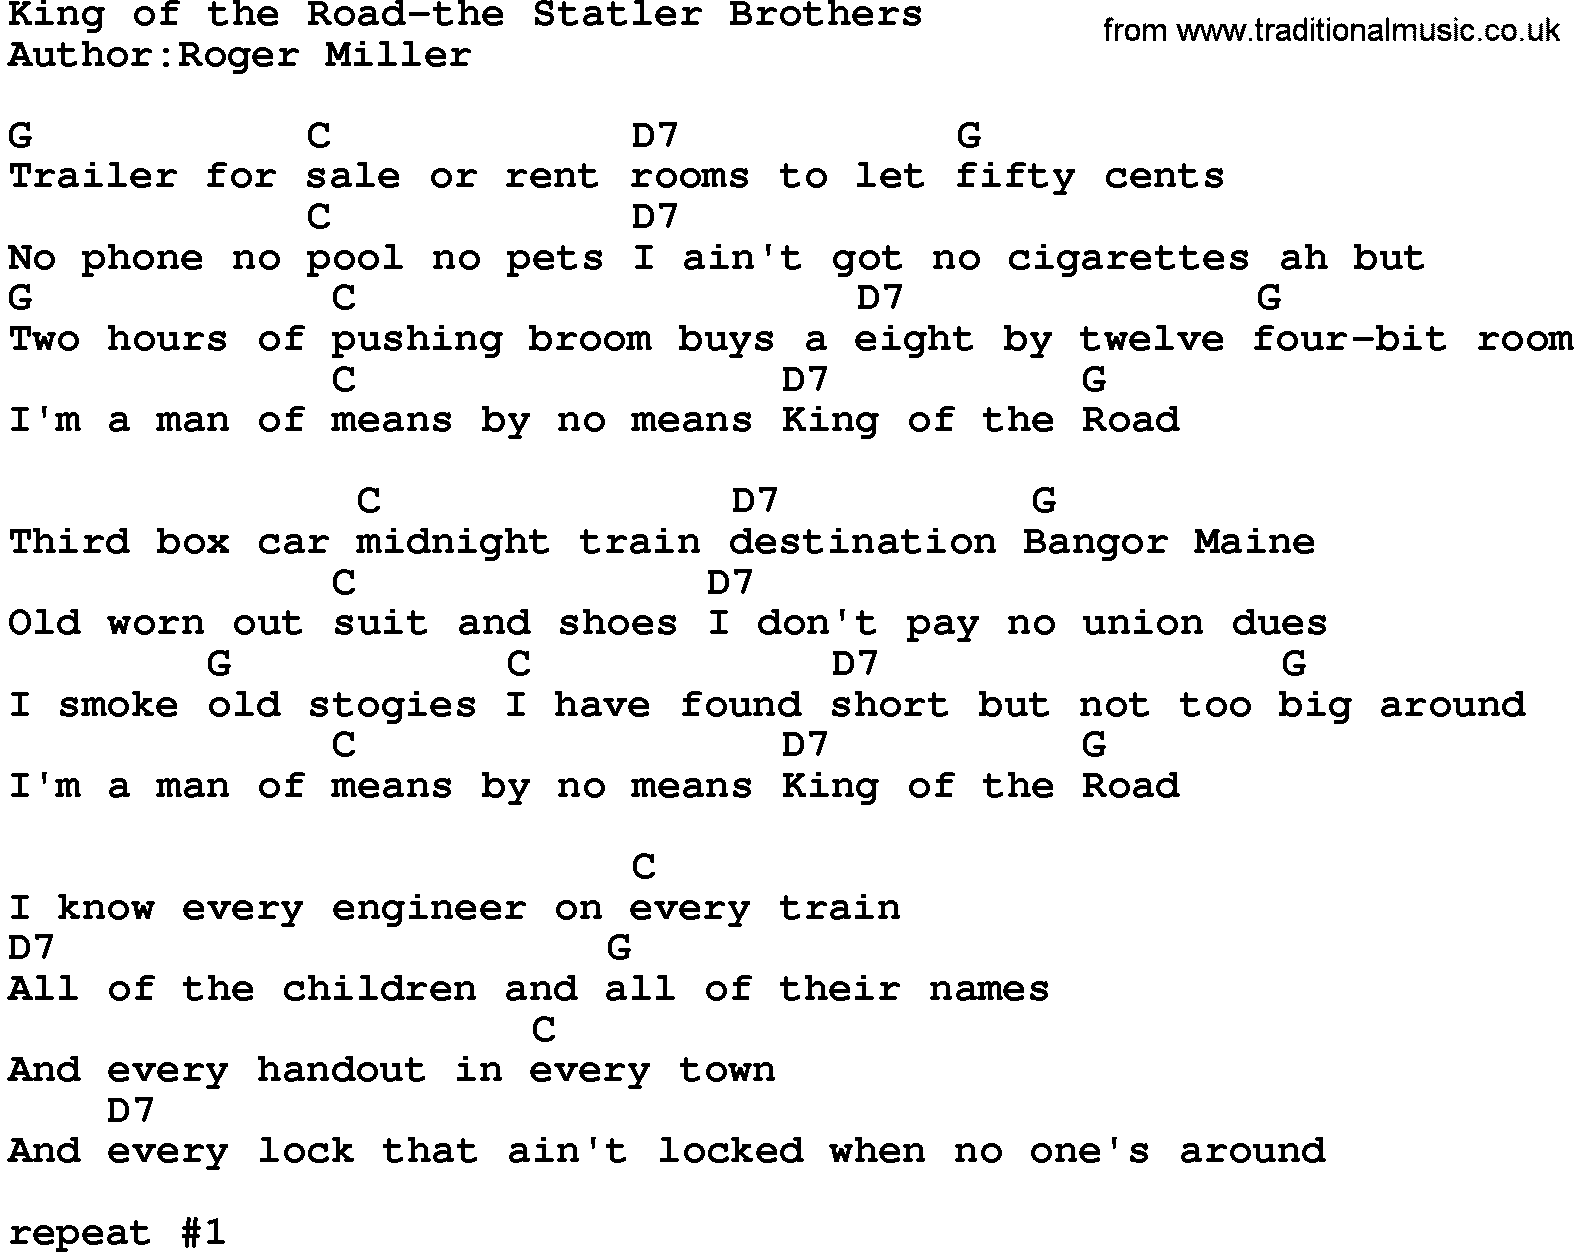 Country music song: King Of The Road-The Statler Brothers lyrics and chords